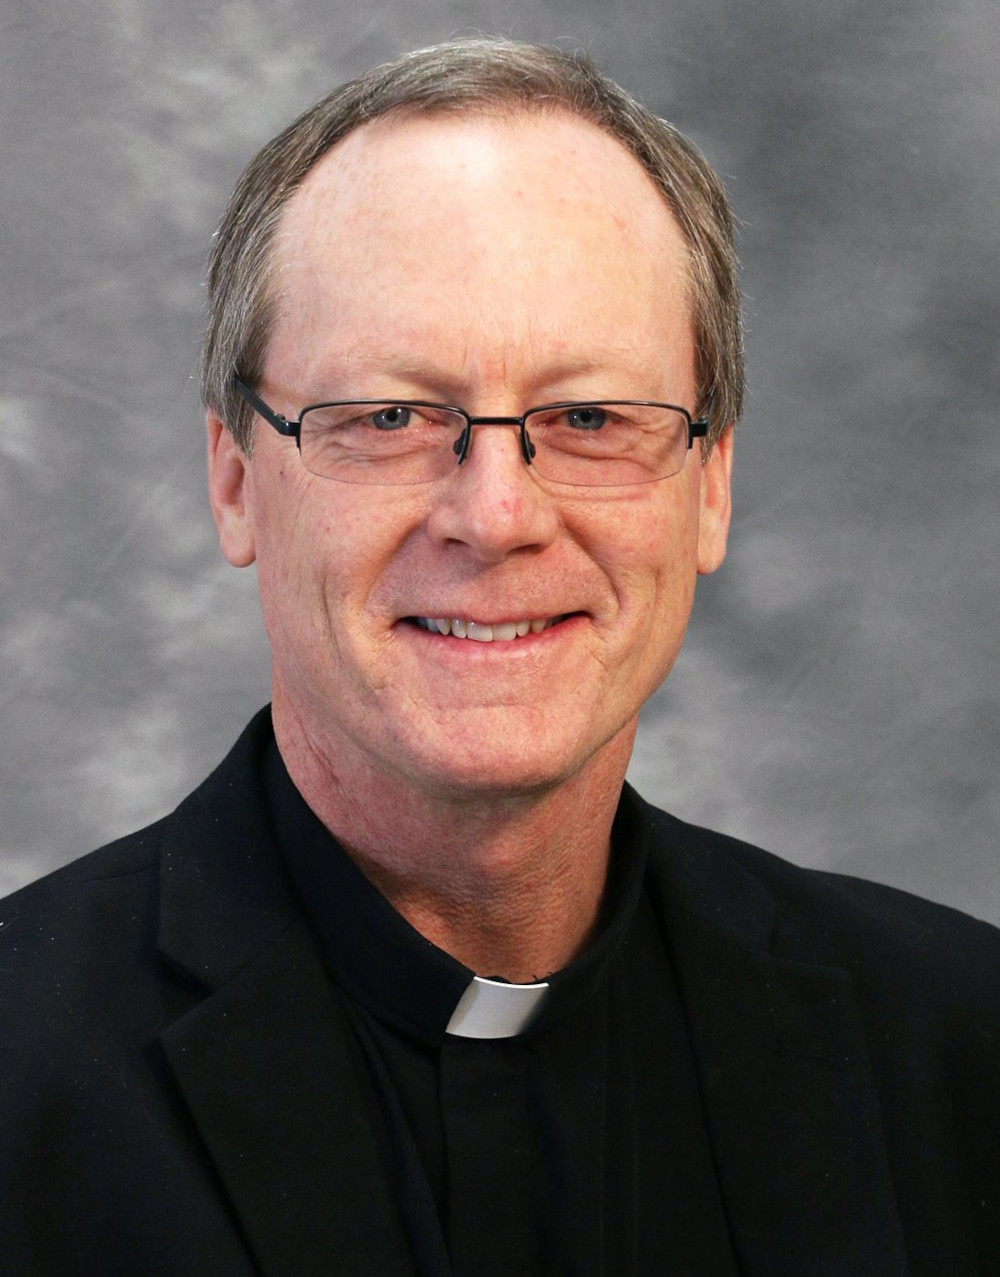 An older white man wearing glasses and a clerical collar smiles at the camera